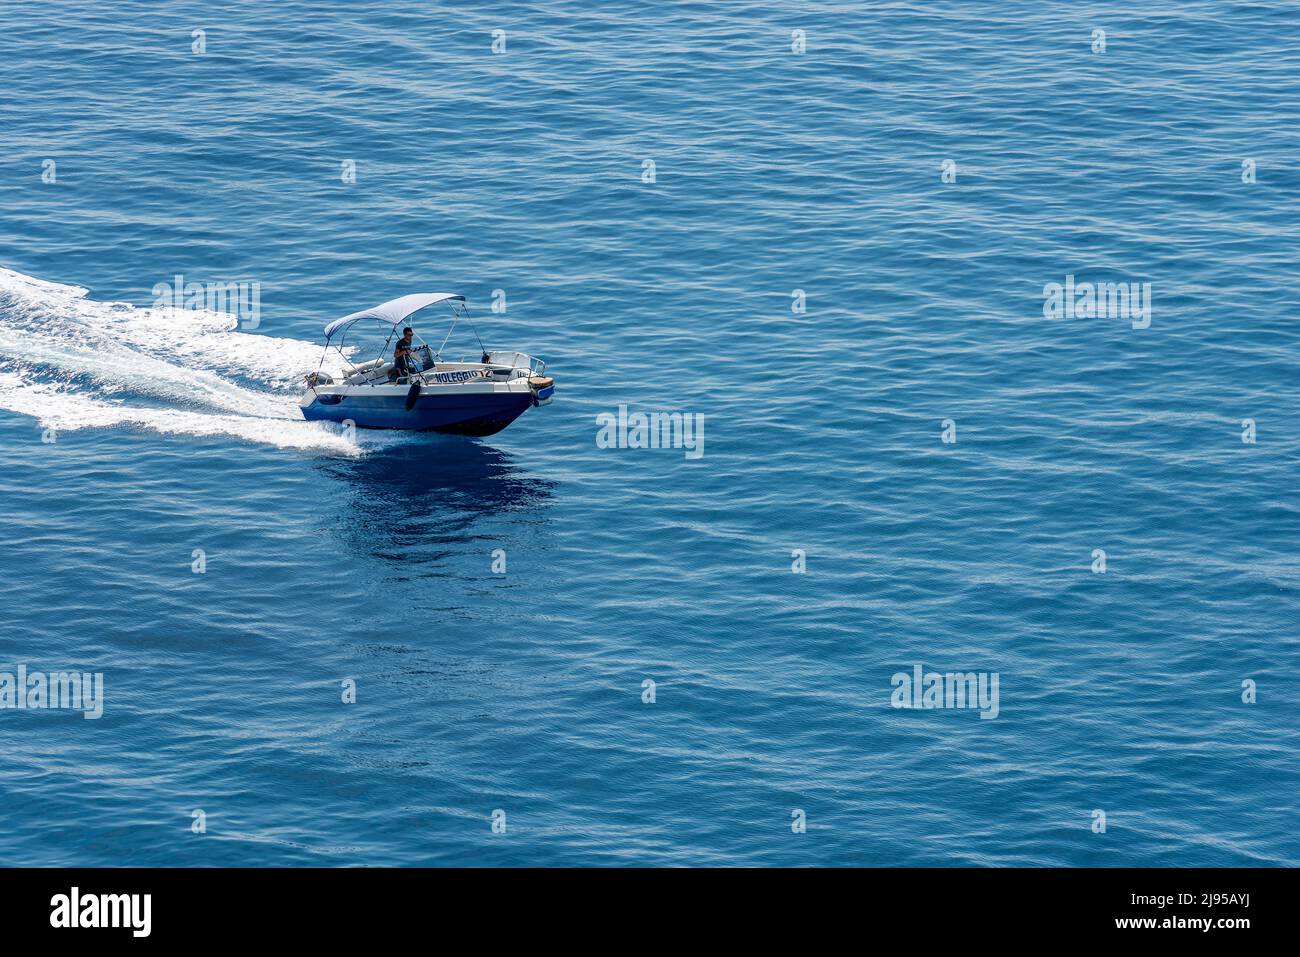 Small blue motor boat with one person on board runs fast in the blue Mediterranean sea with white wake, Cinque Terre, Liguria, Italy. Stock Photo